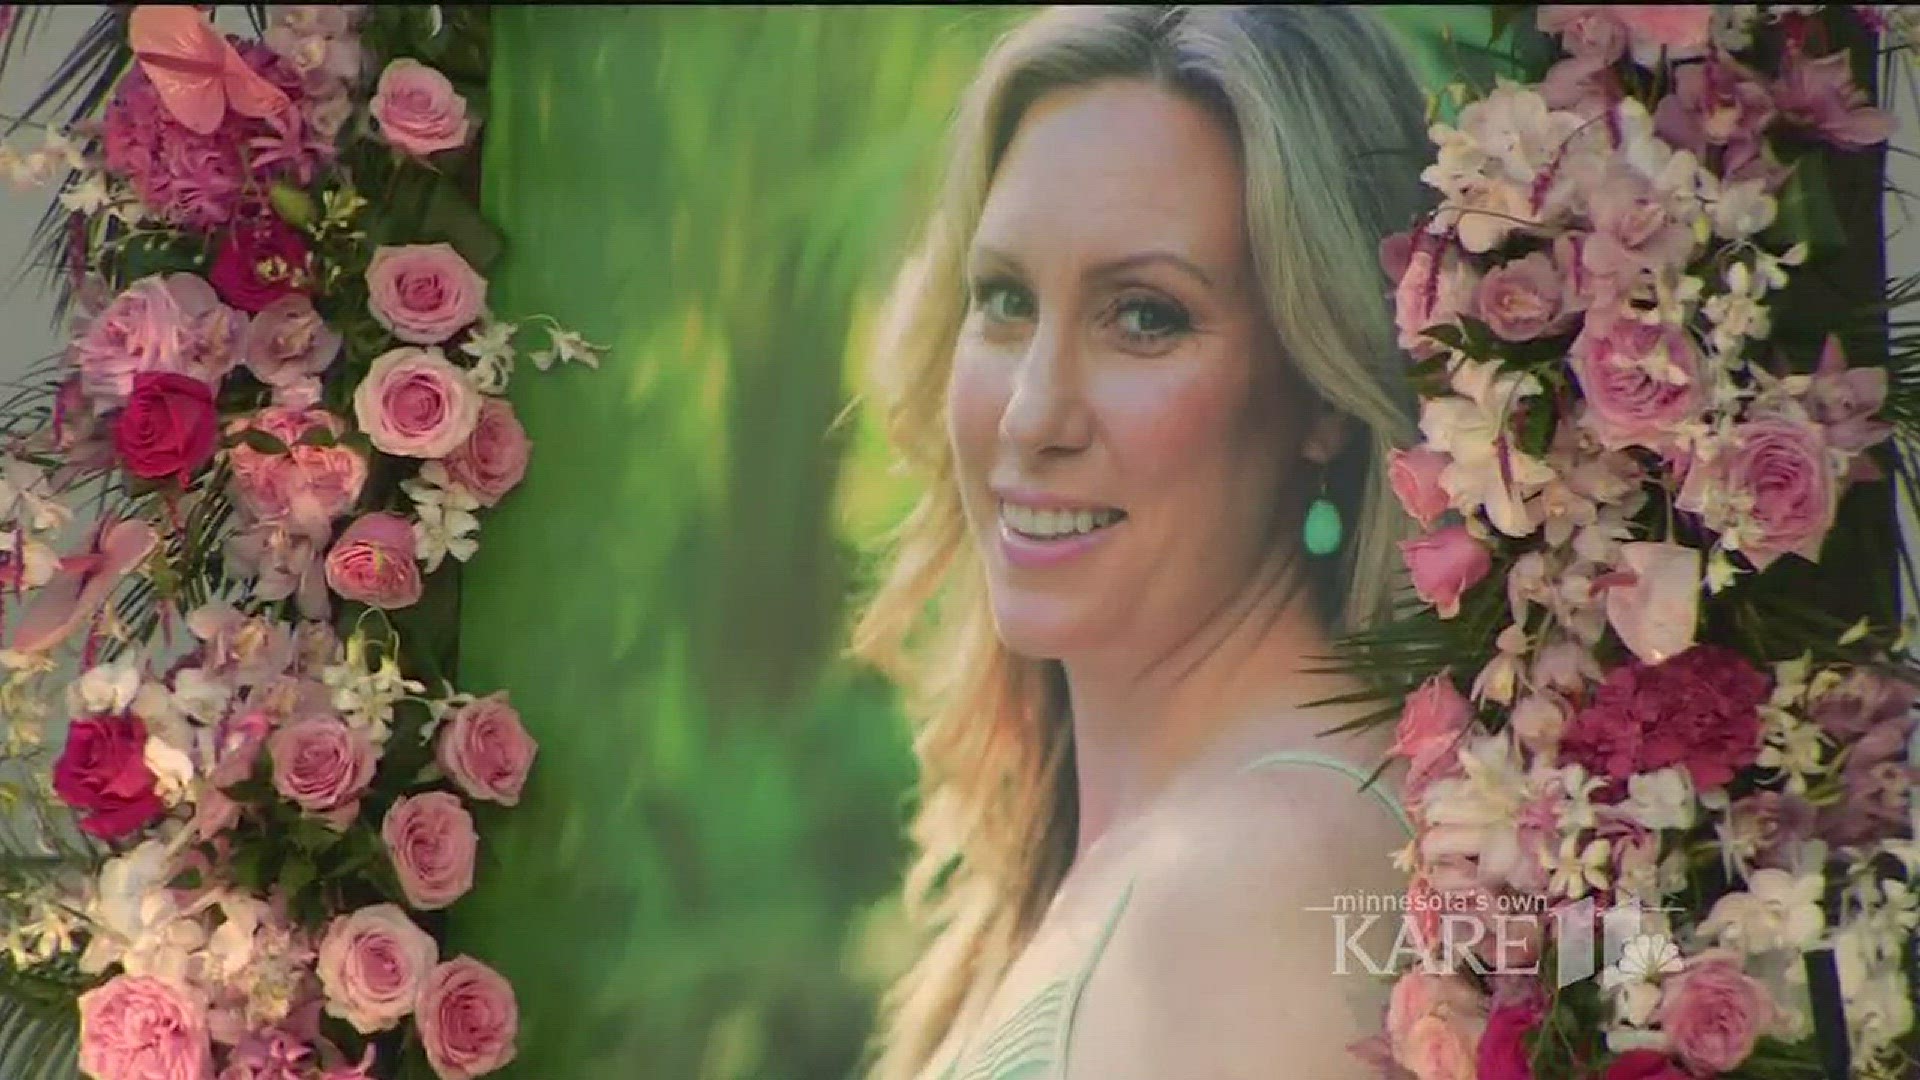 Loving. Healing. Joyful. Spiritual. A few of the ways family and friends from near and far described Justine Damond Friday night during a public memorial service at Lake Harriet in Minneapolis. http://kare11.tv/2vYM8h7